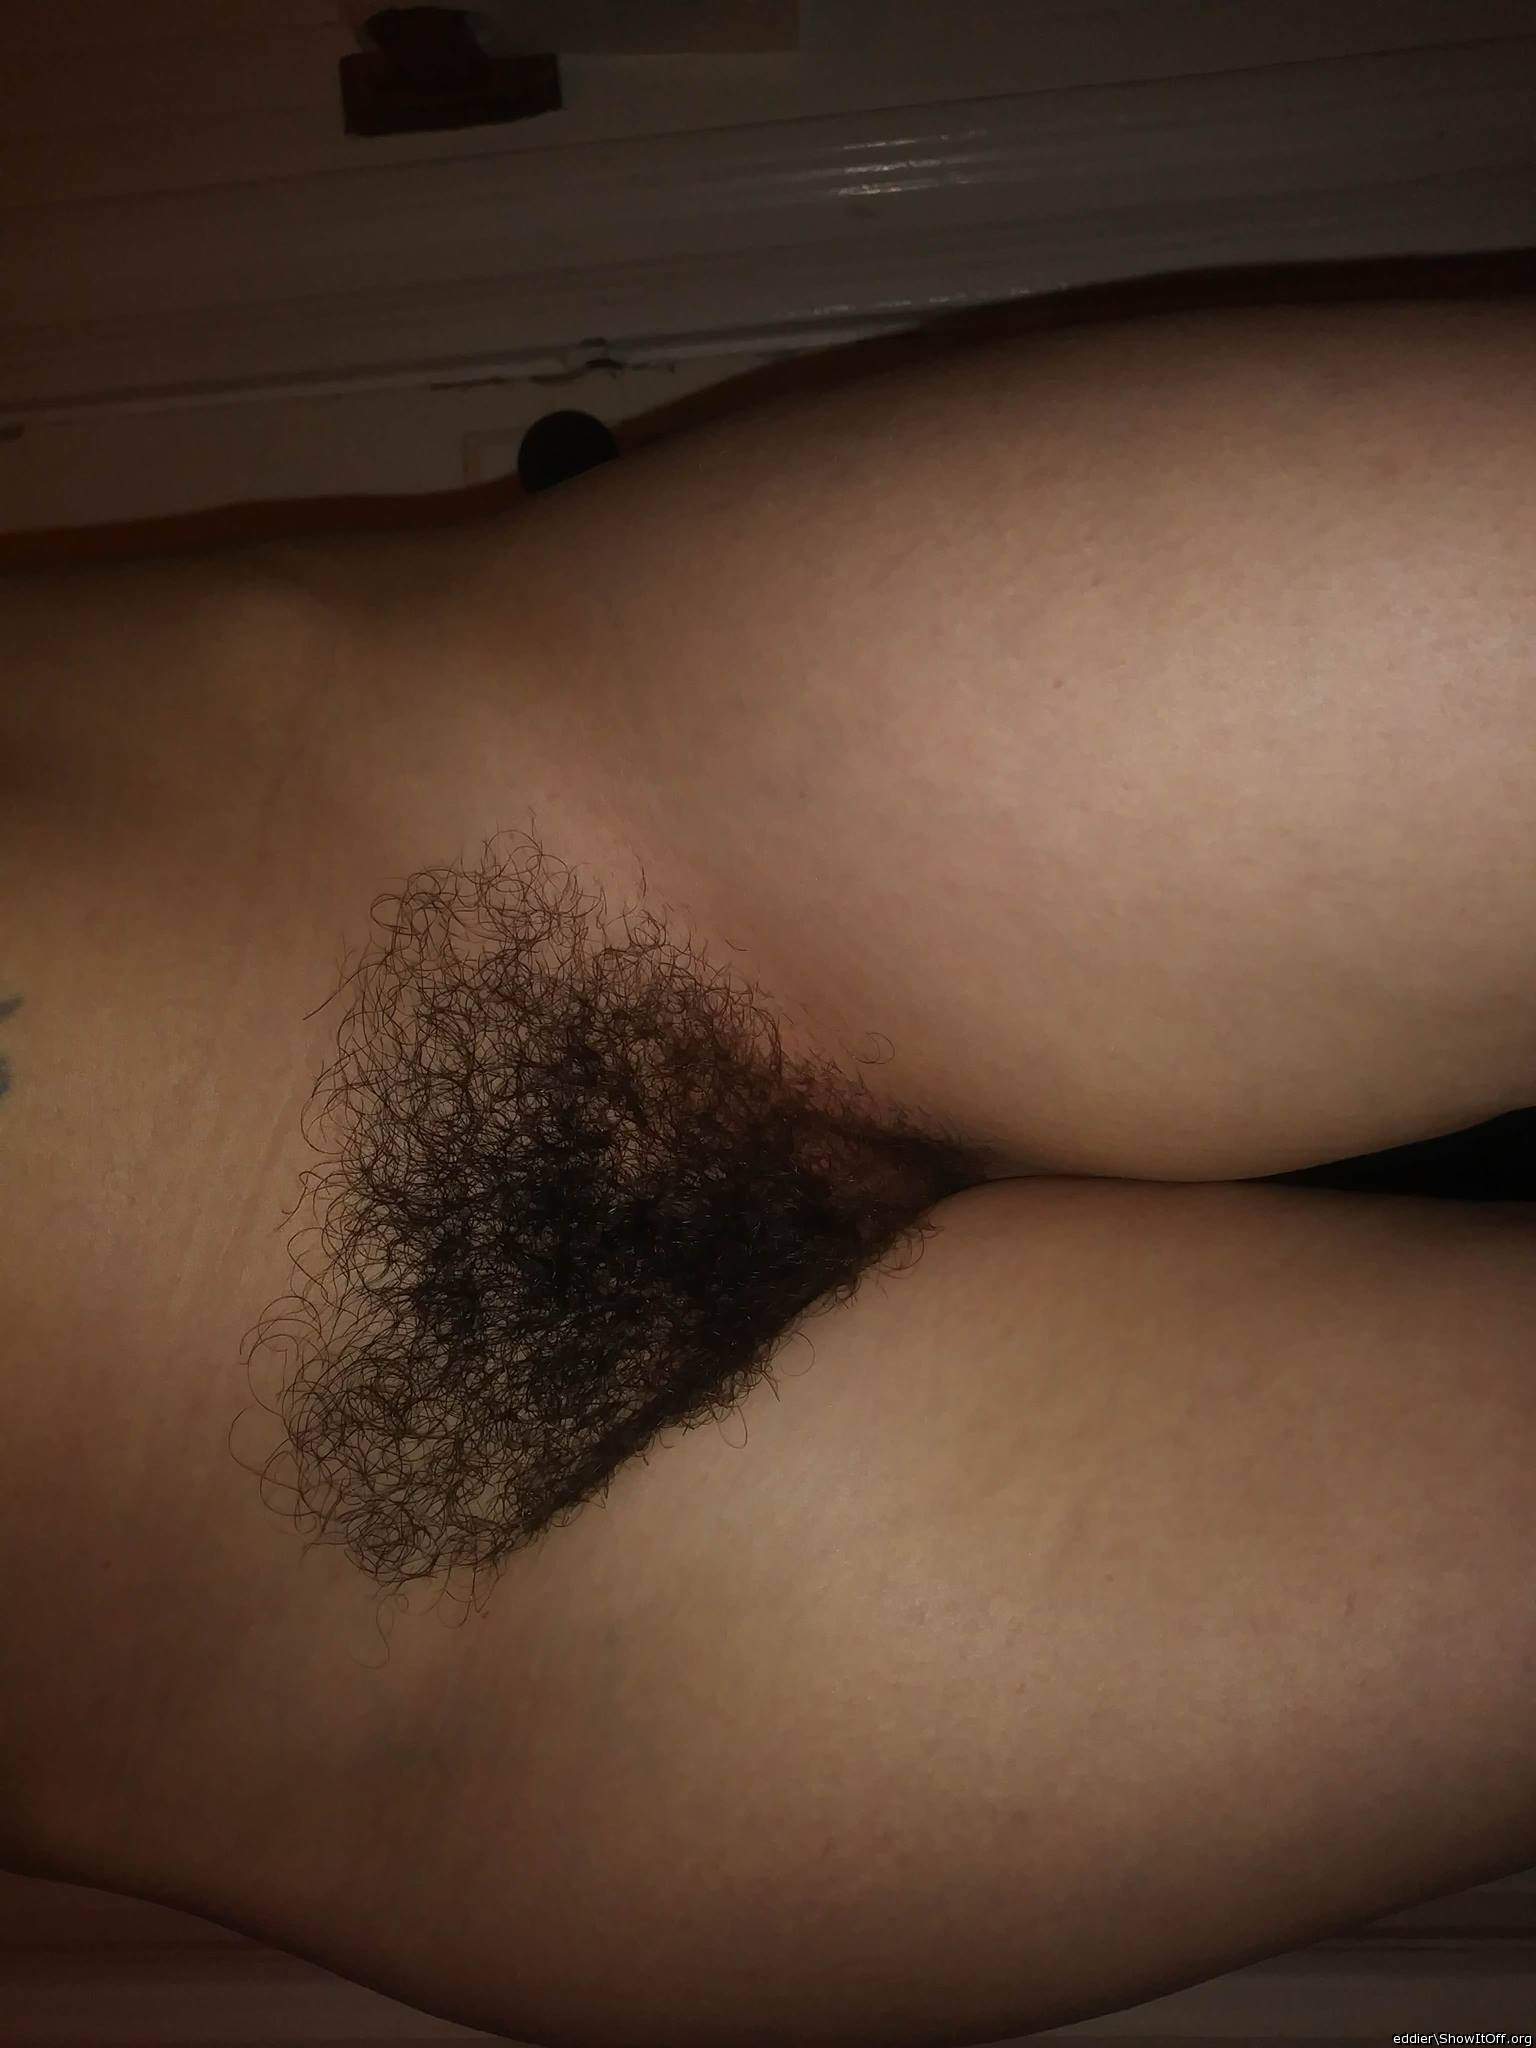 OMG you have the best fur, I LOVE it!!!

Super sexy